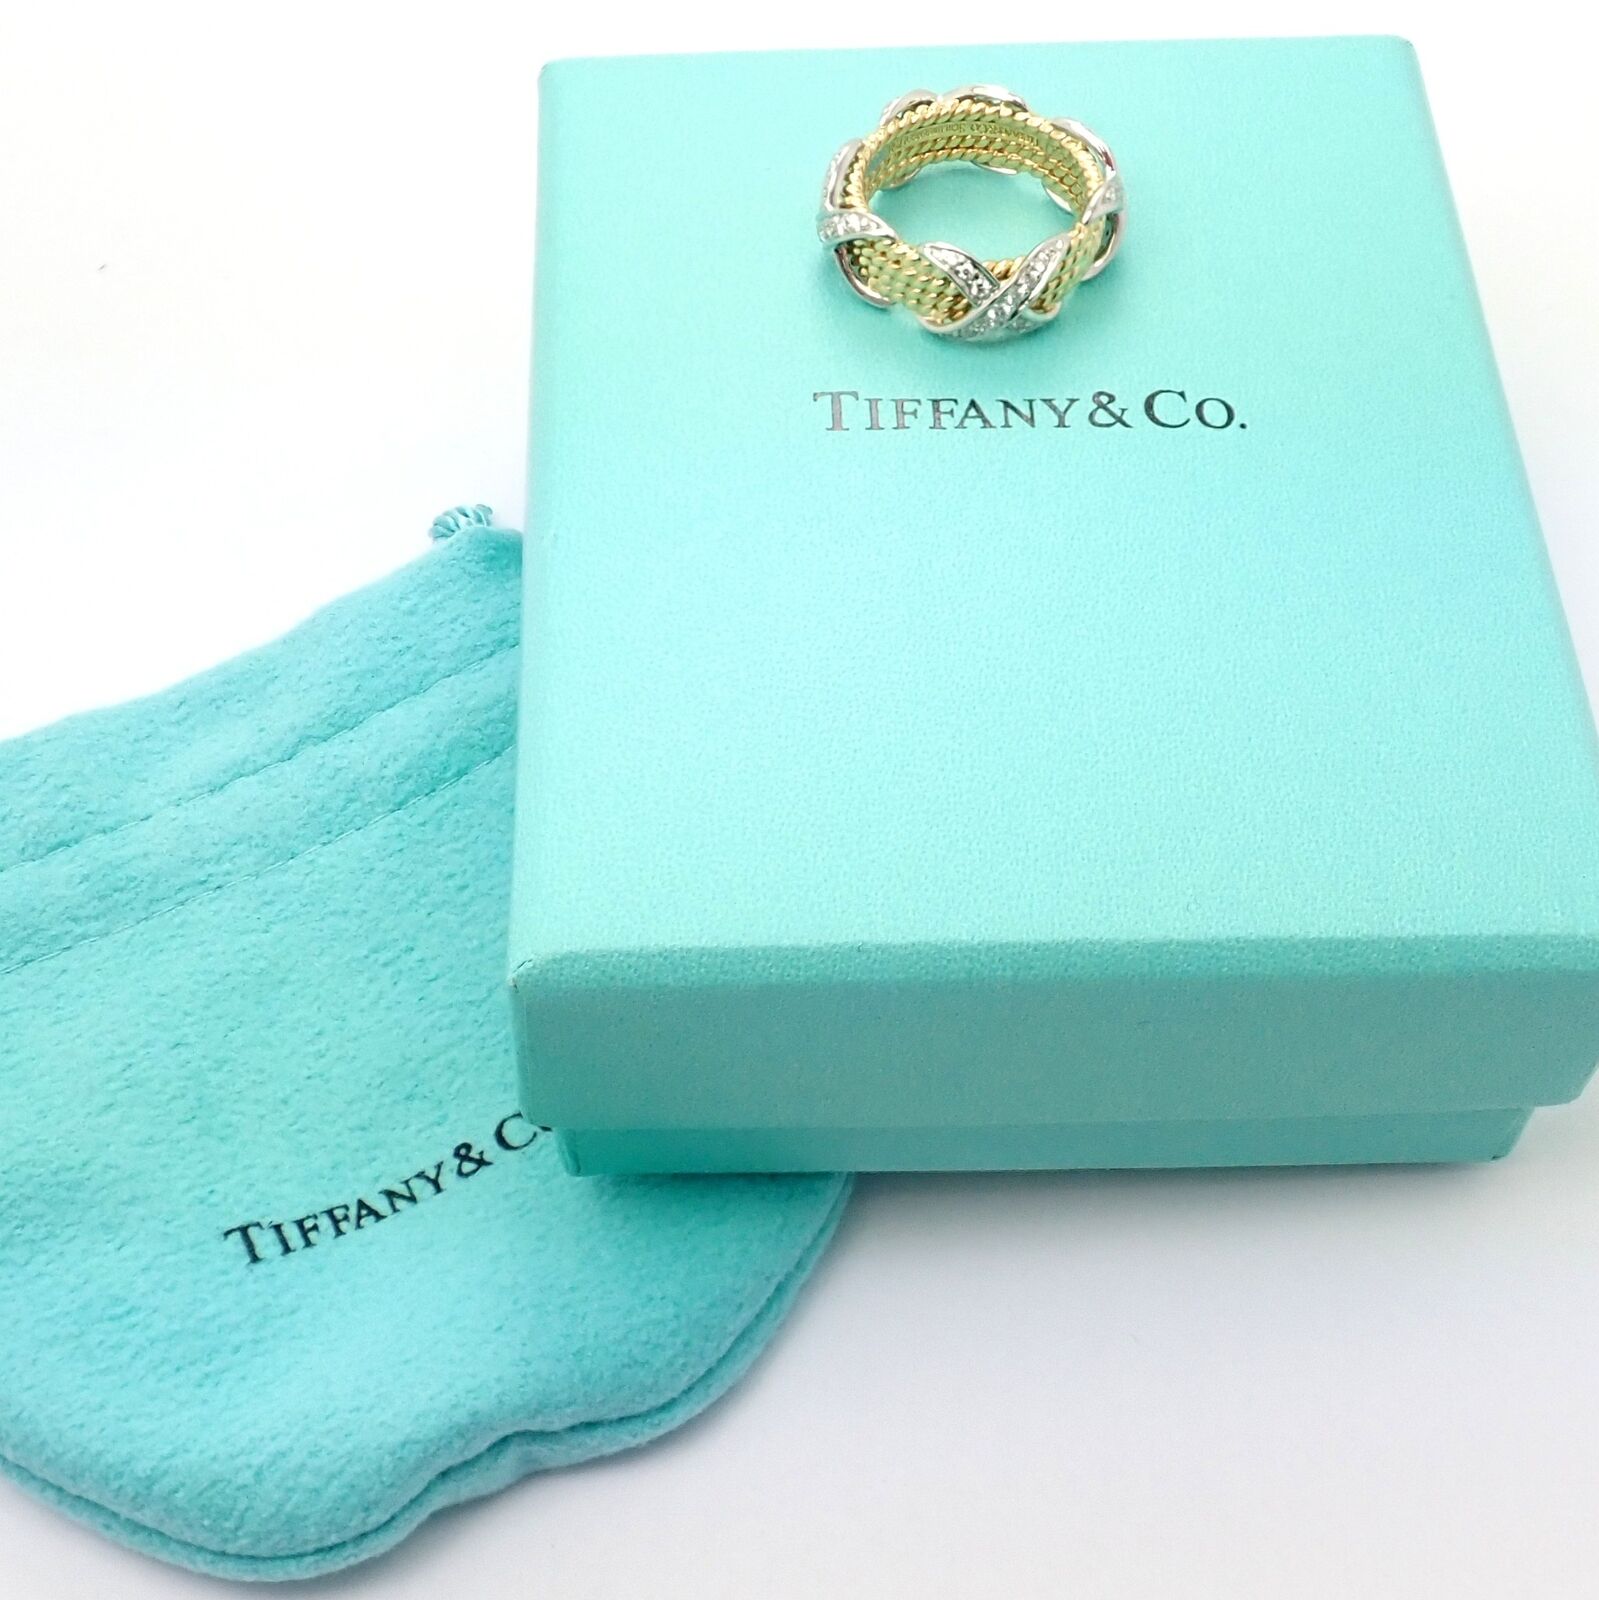 Tiffany & Co. Scarf Ring - Sterling Silver Pendant, Brooches